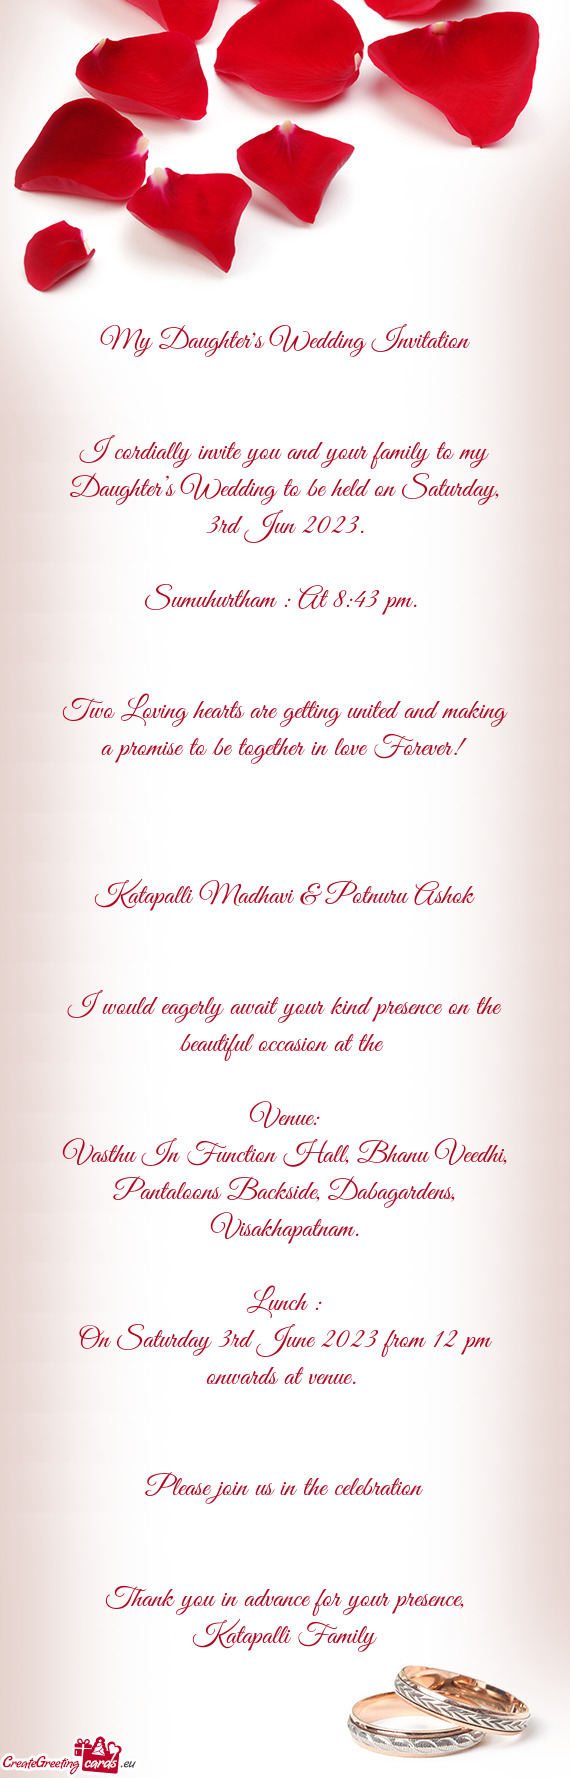 I cordially invite you and your family to my Daughter’s Wedding to be held on Saturday, 3rd Jun 20